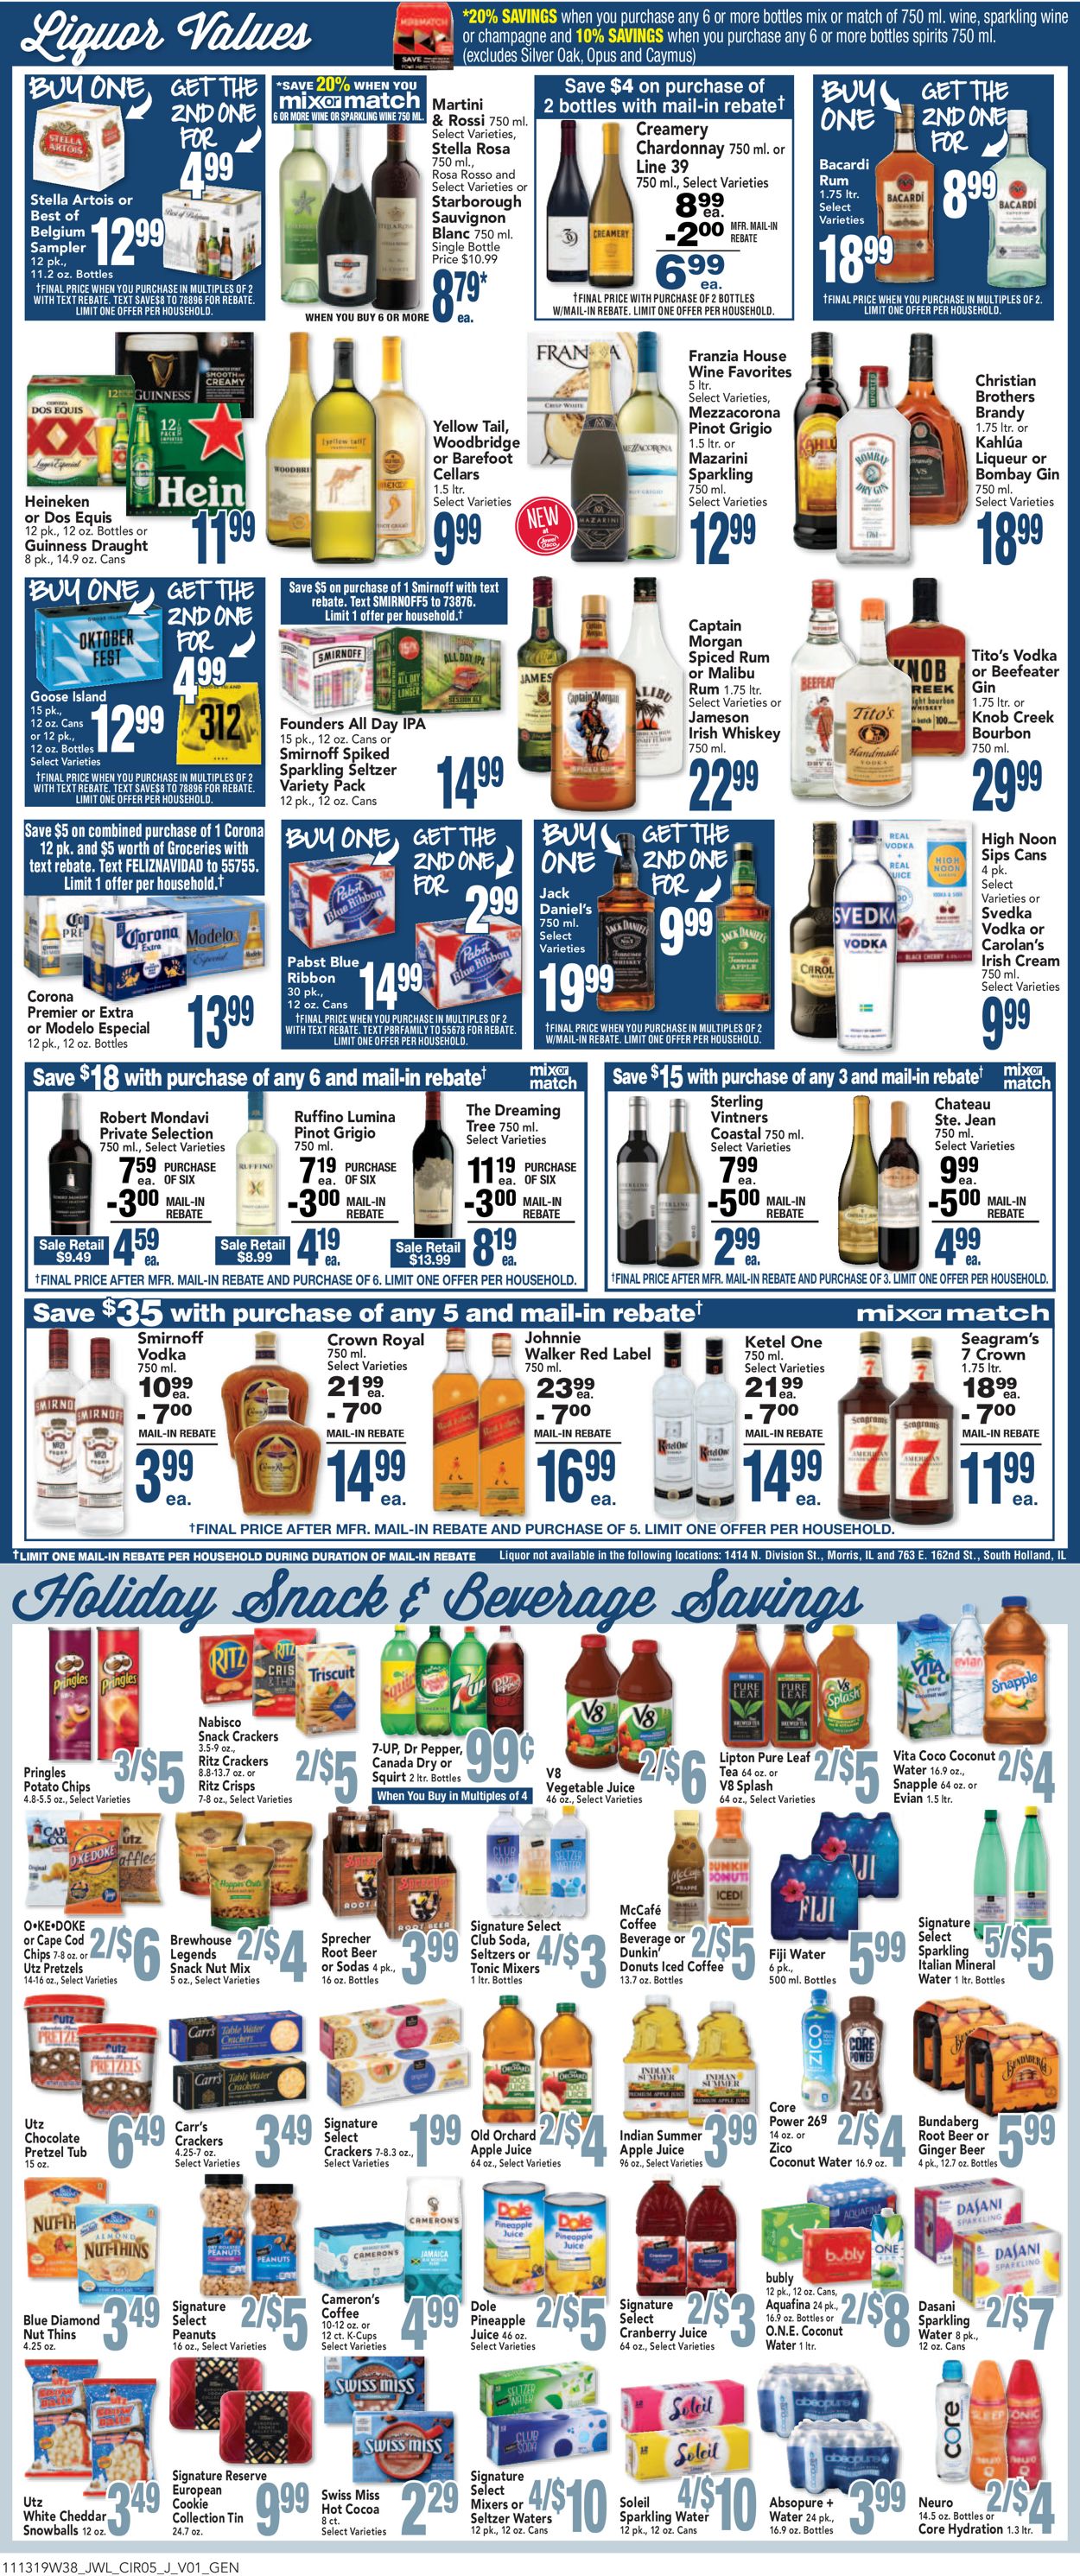 jewel-osco-current-weekly-ad-11-13-11-19-2019-8-frequent-ads